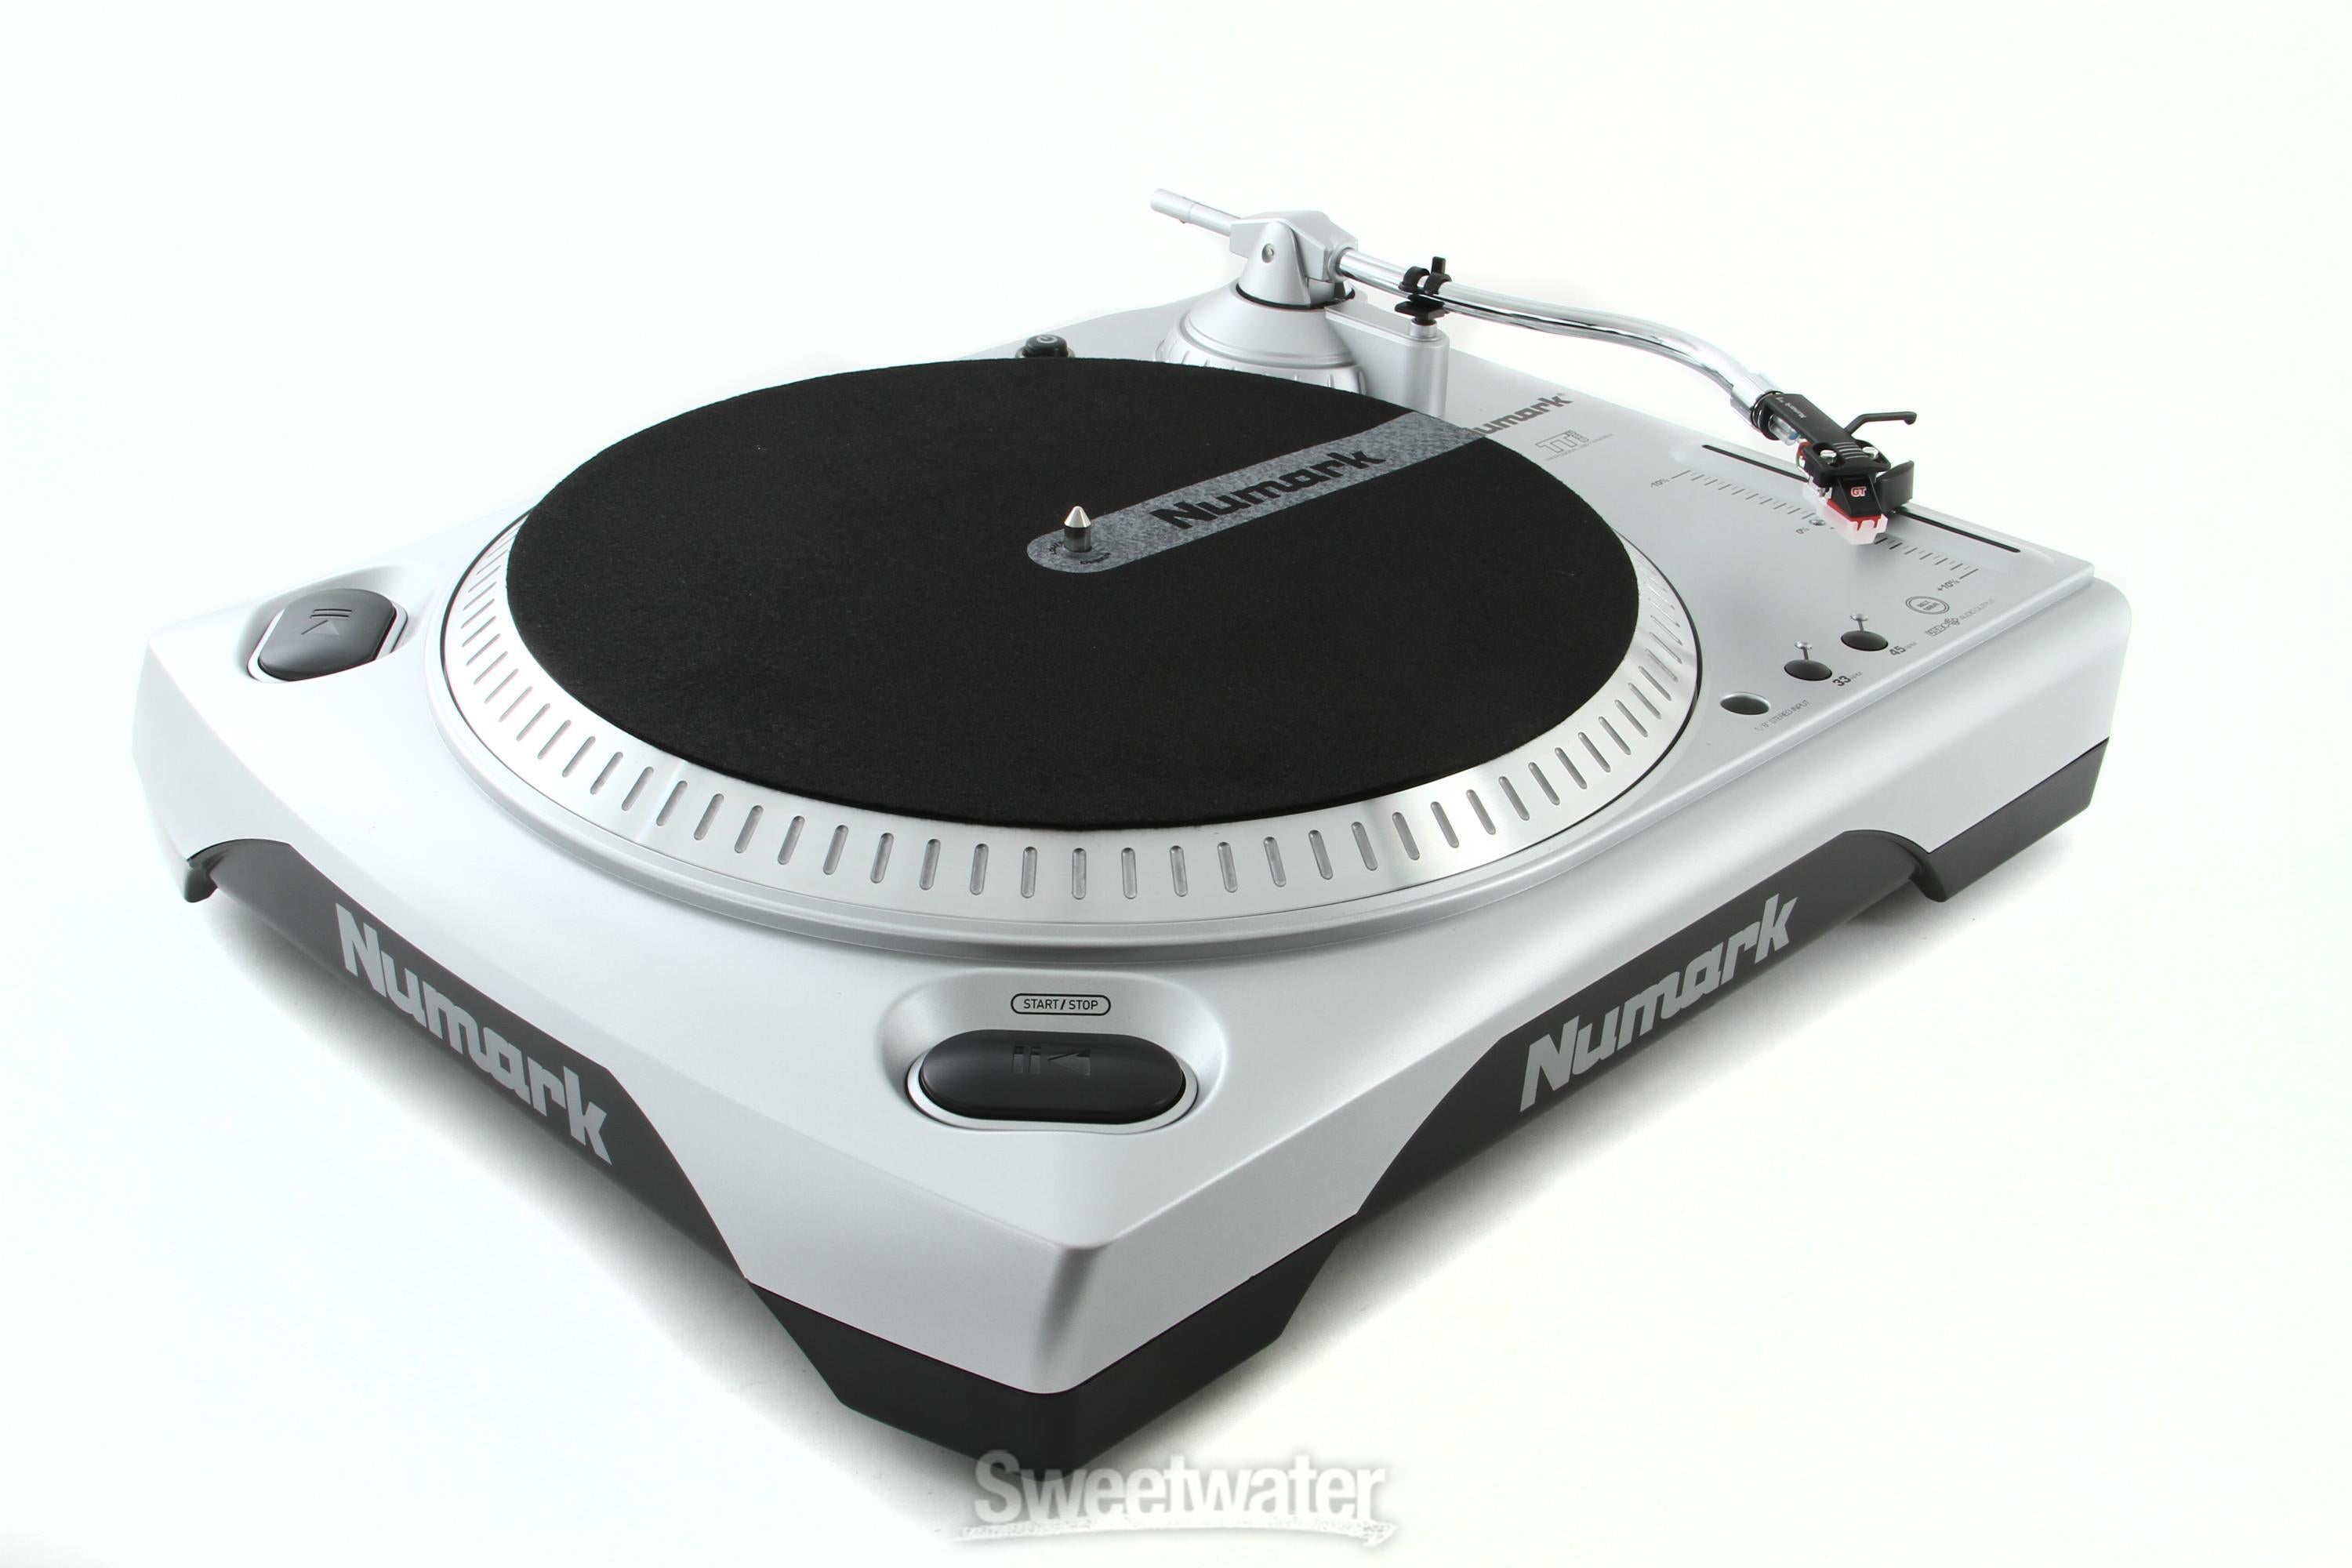 Numark TTUSB Turntable Reviews | Sweetwater